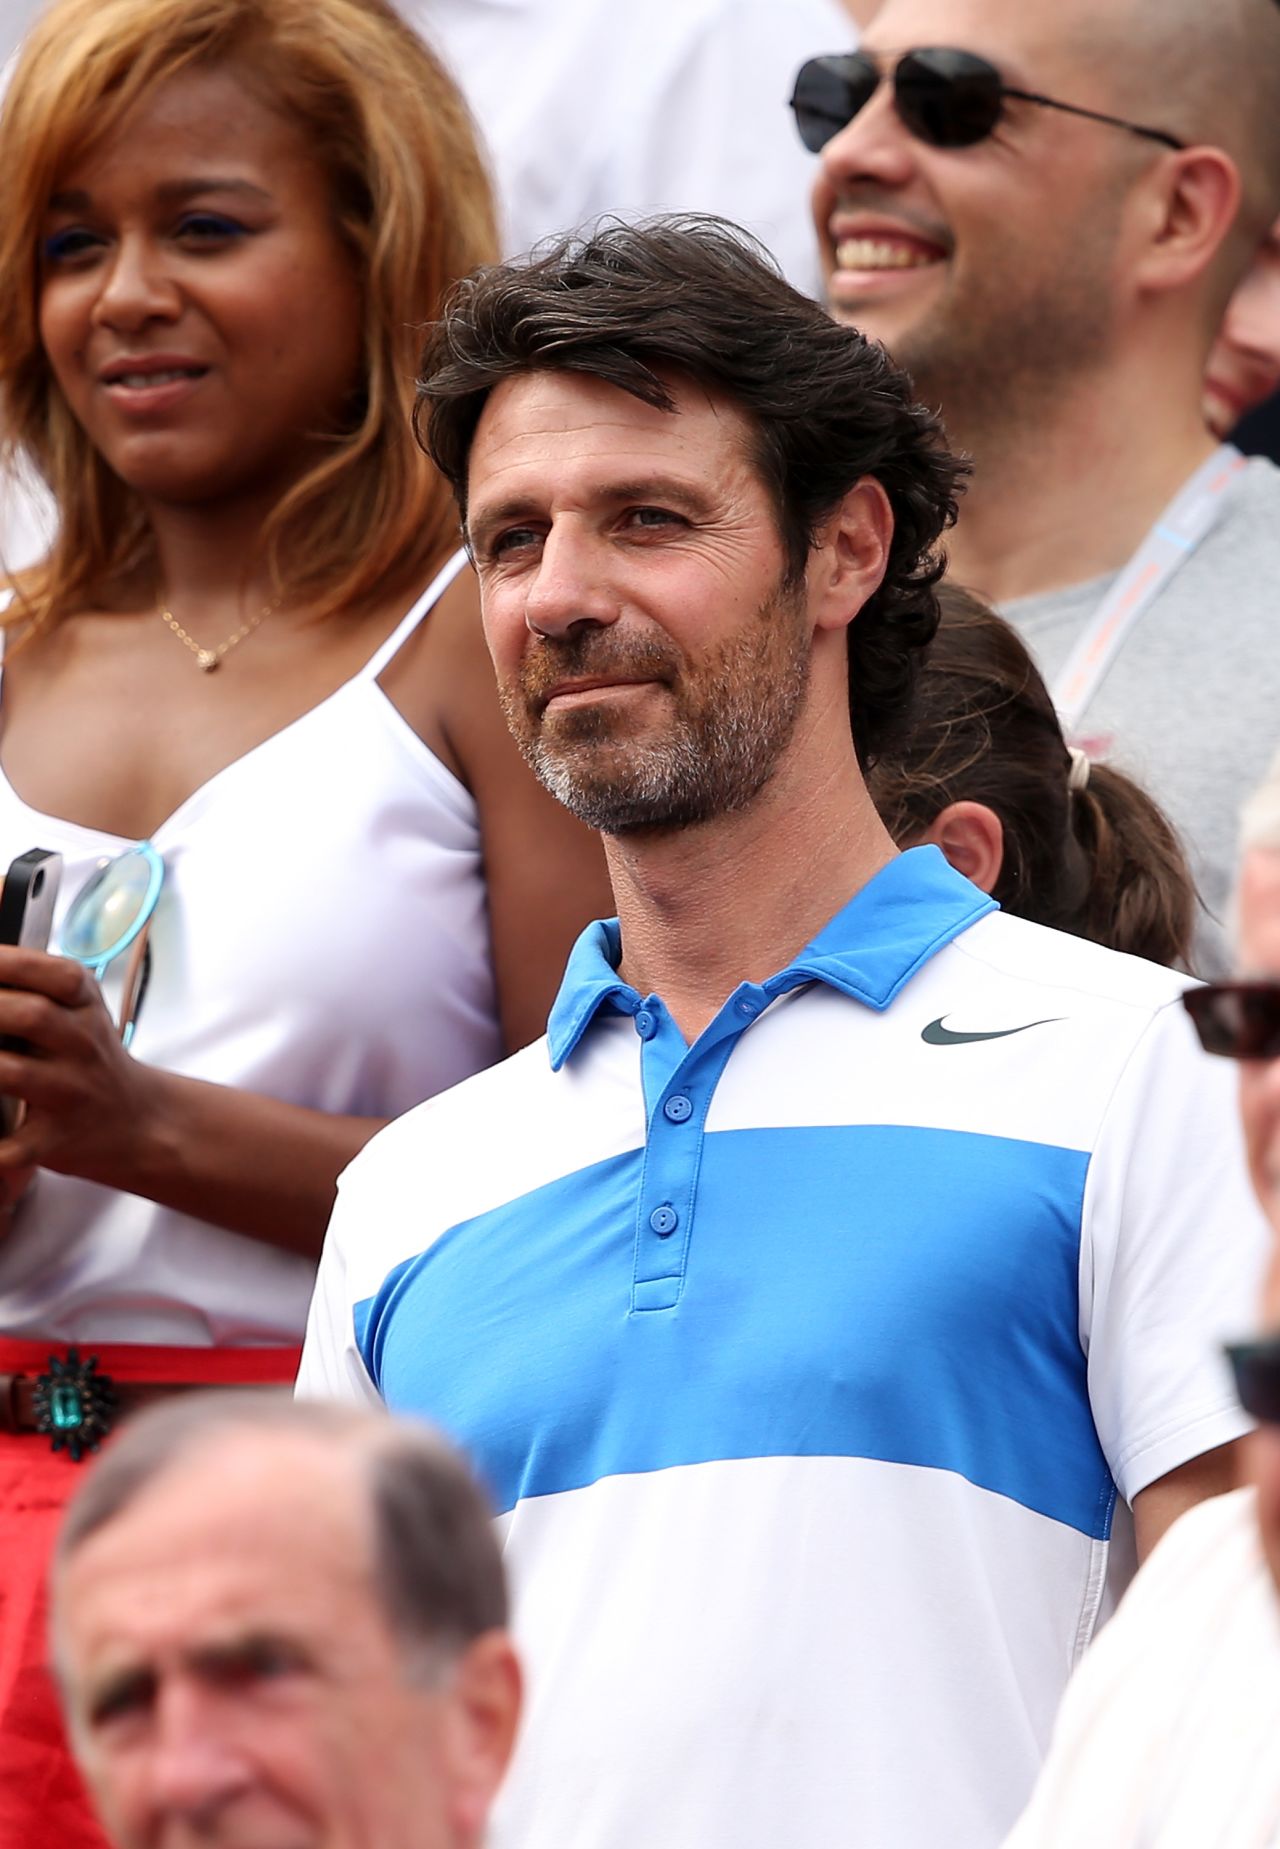 Mouratoglou, with whom Serena has been romantically linked, helped Serena win 16 titles in 16 months, with a record of 95 victories and five defeats. He told CNN of that meeting in Paris: "What surprised me at that point was the motivation she had. She really was prepared to do anything to come back to the top."